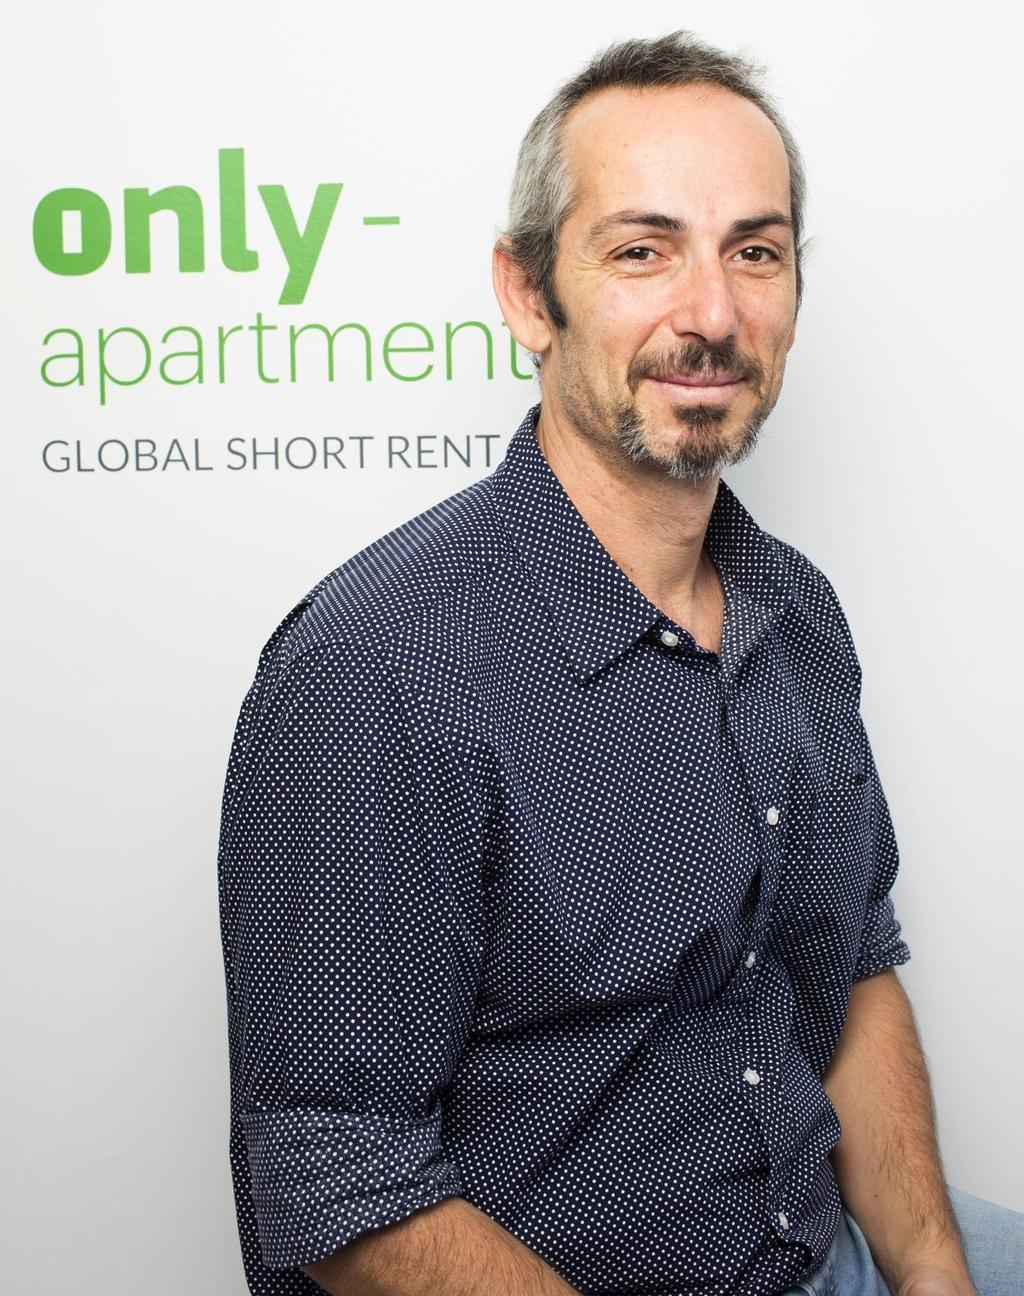 Alon Eldar Stadler CEO and founder Only-apartments 1987 1995: Studied architecture at the School of Architecture of Barcelona (ETSAB) In 1995, creates his own architecture study, having a lot of